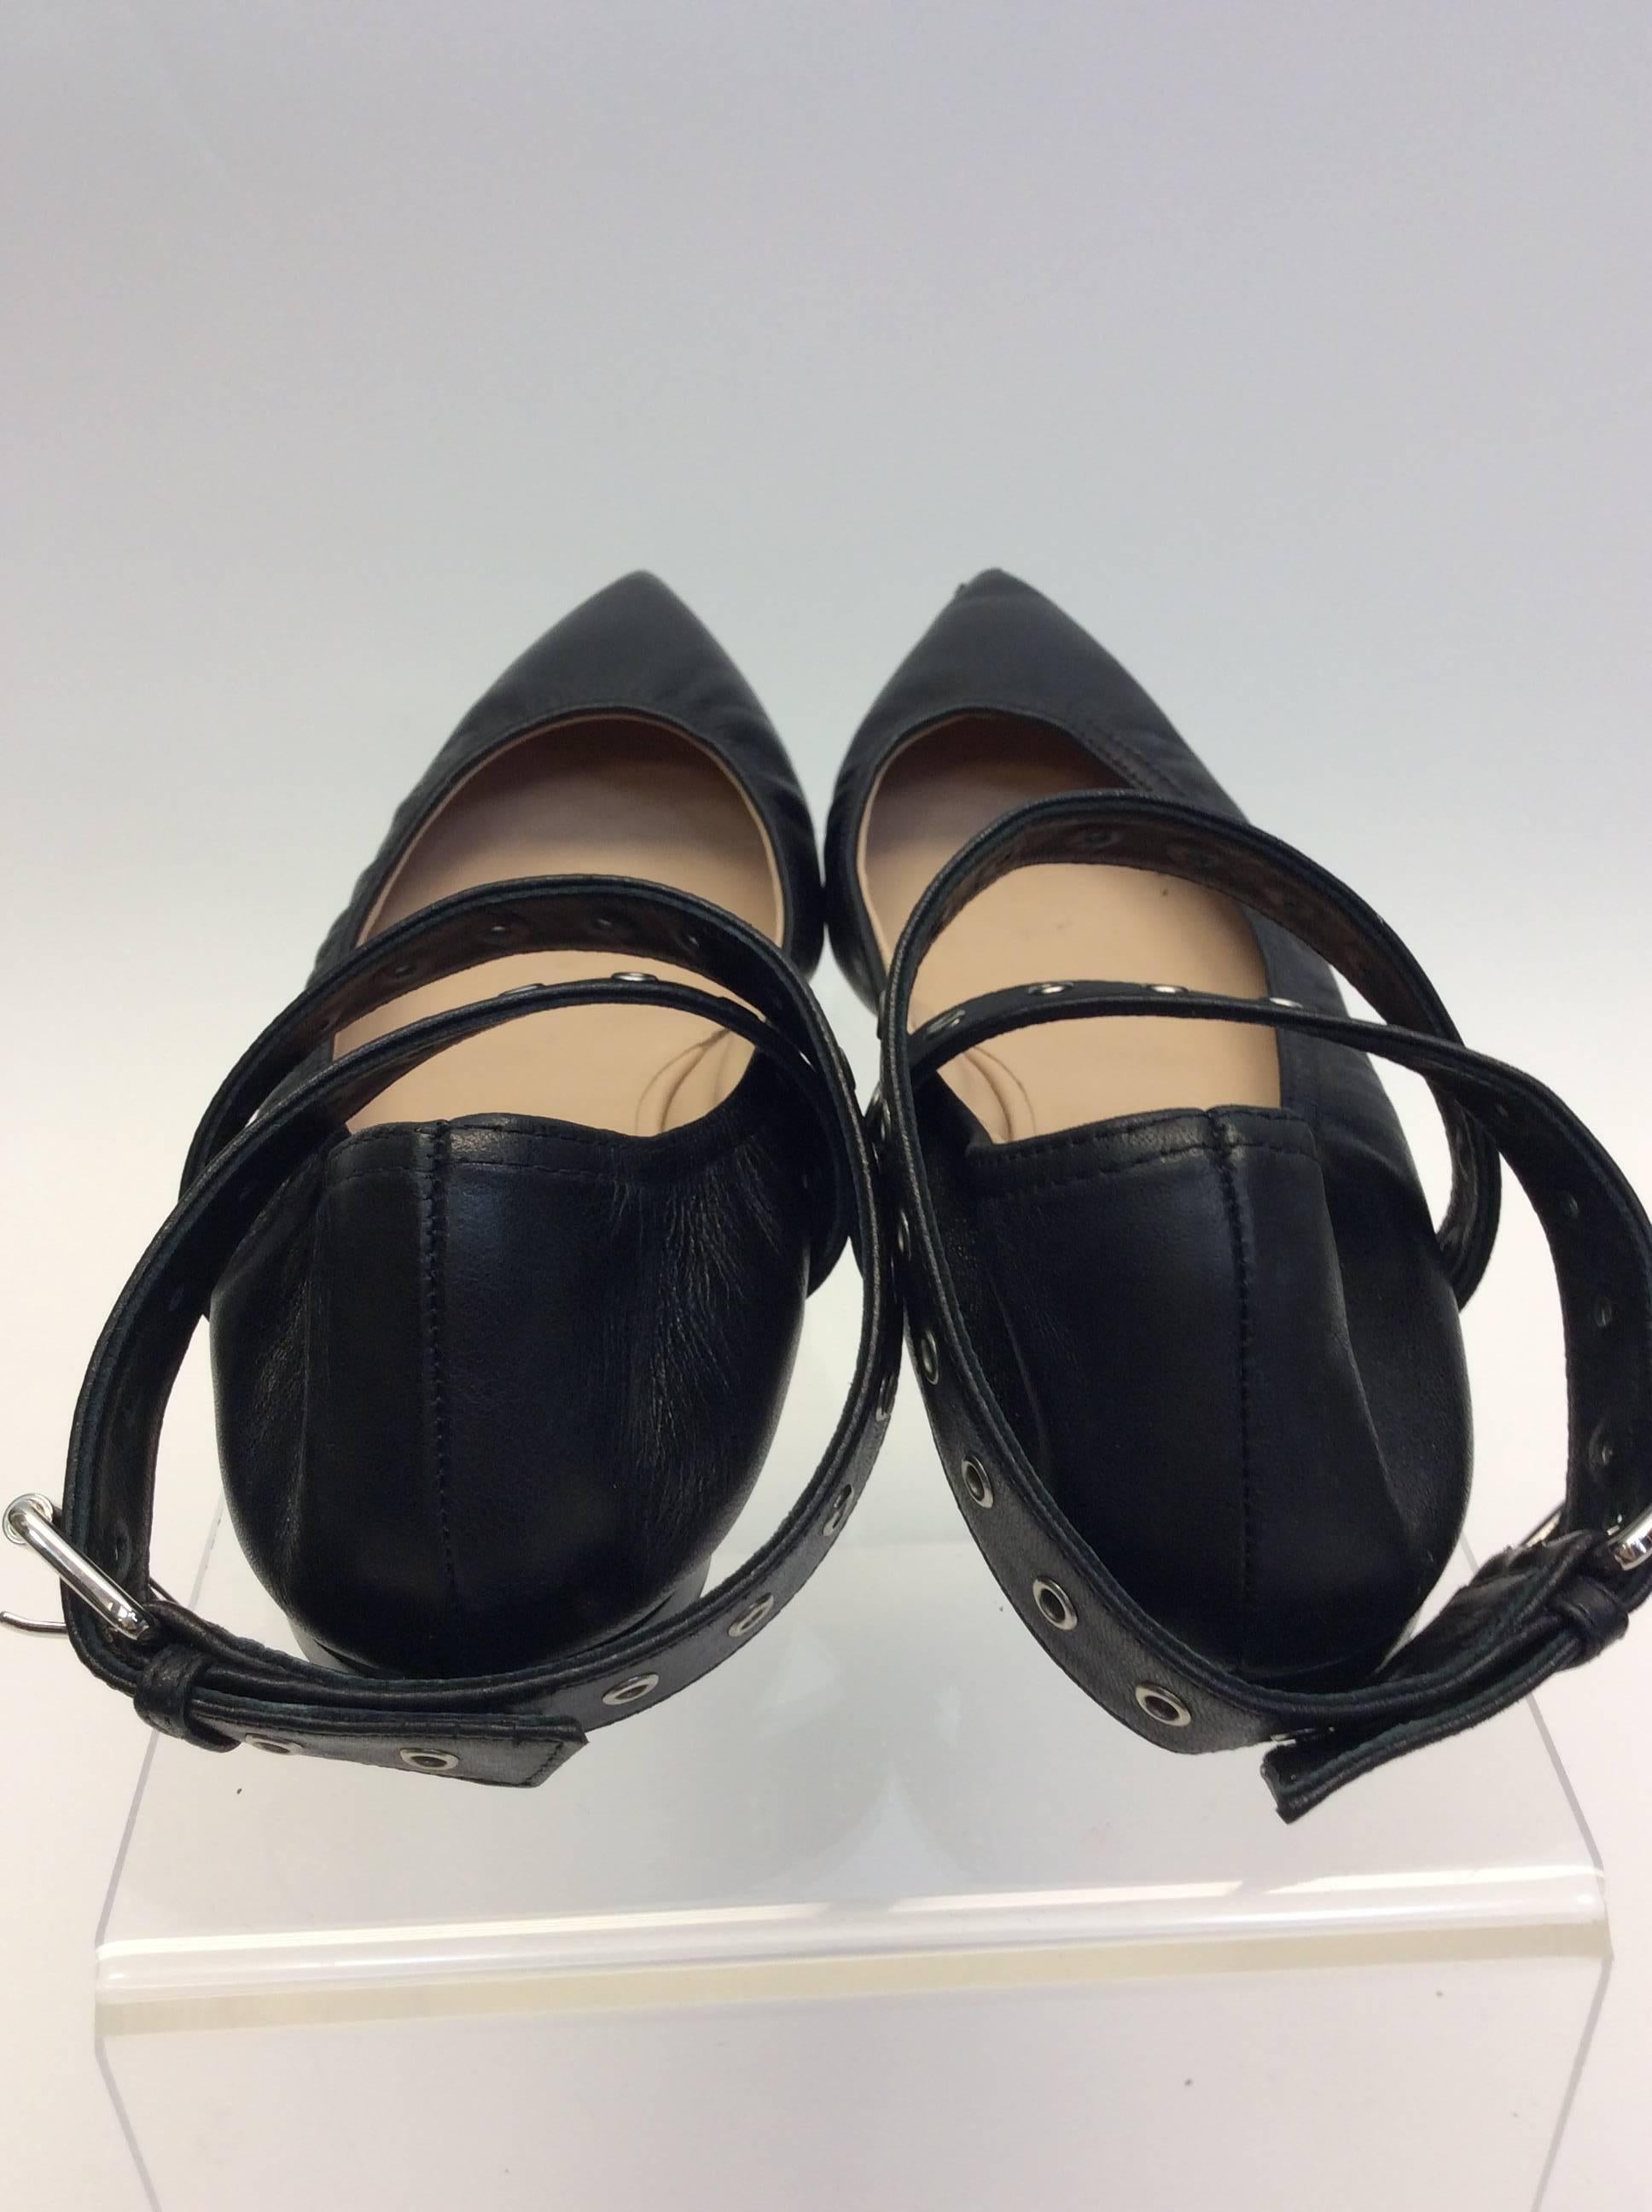 Valentino Black Leather Flats In Good Condition For Sale In Narberth, PA